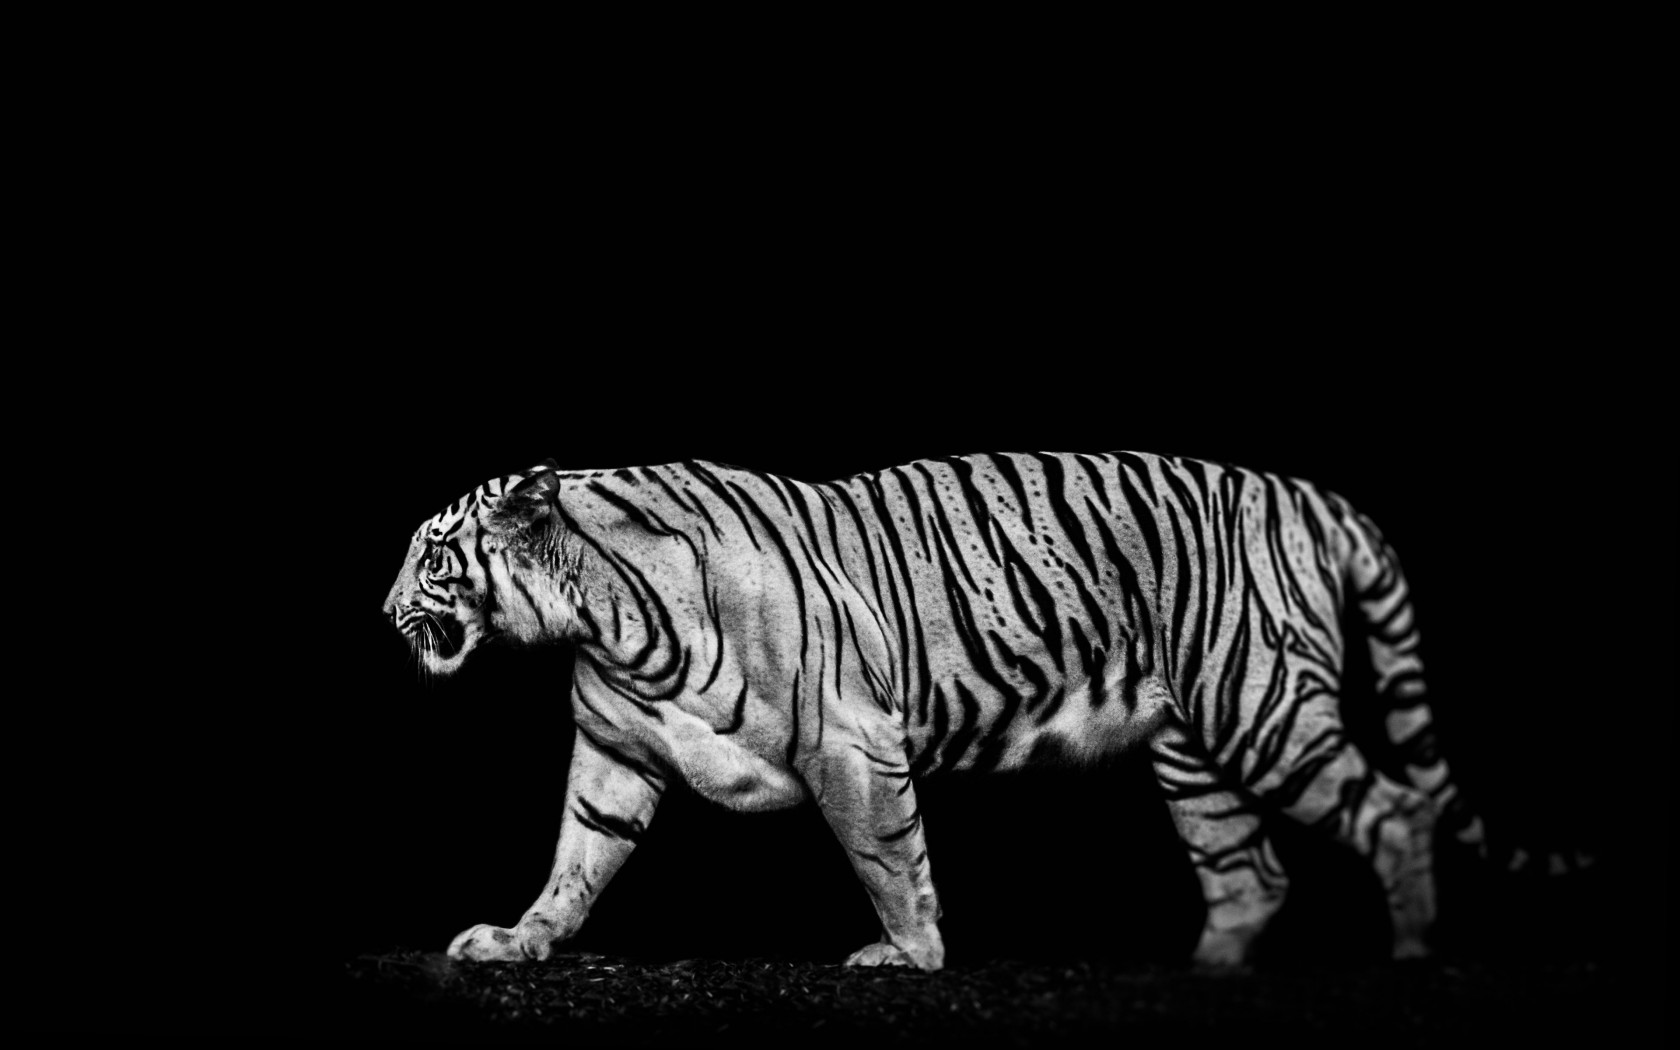 Tiger in the darkness wallpaper 1680x1050